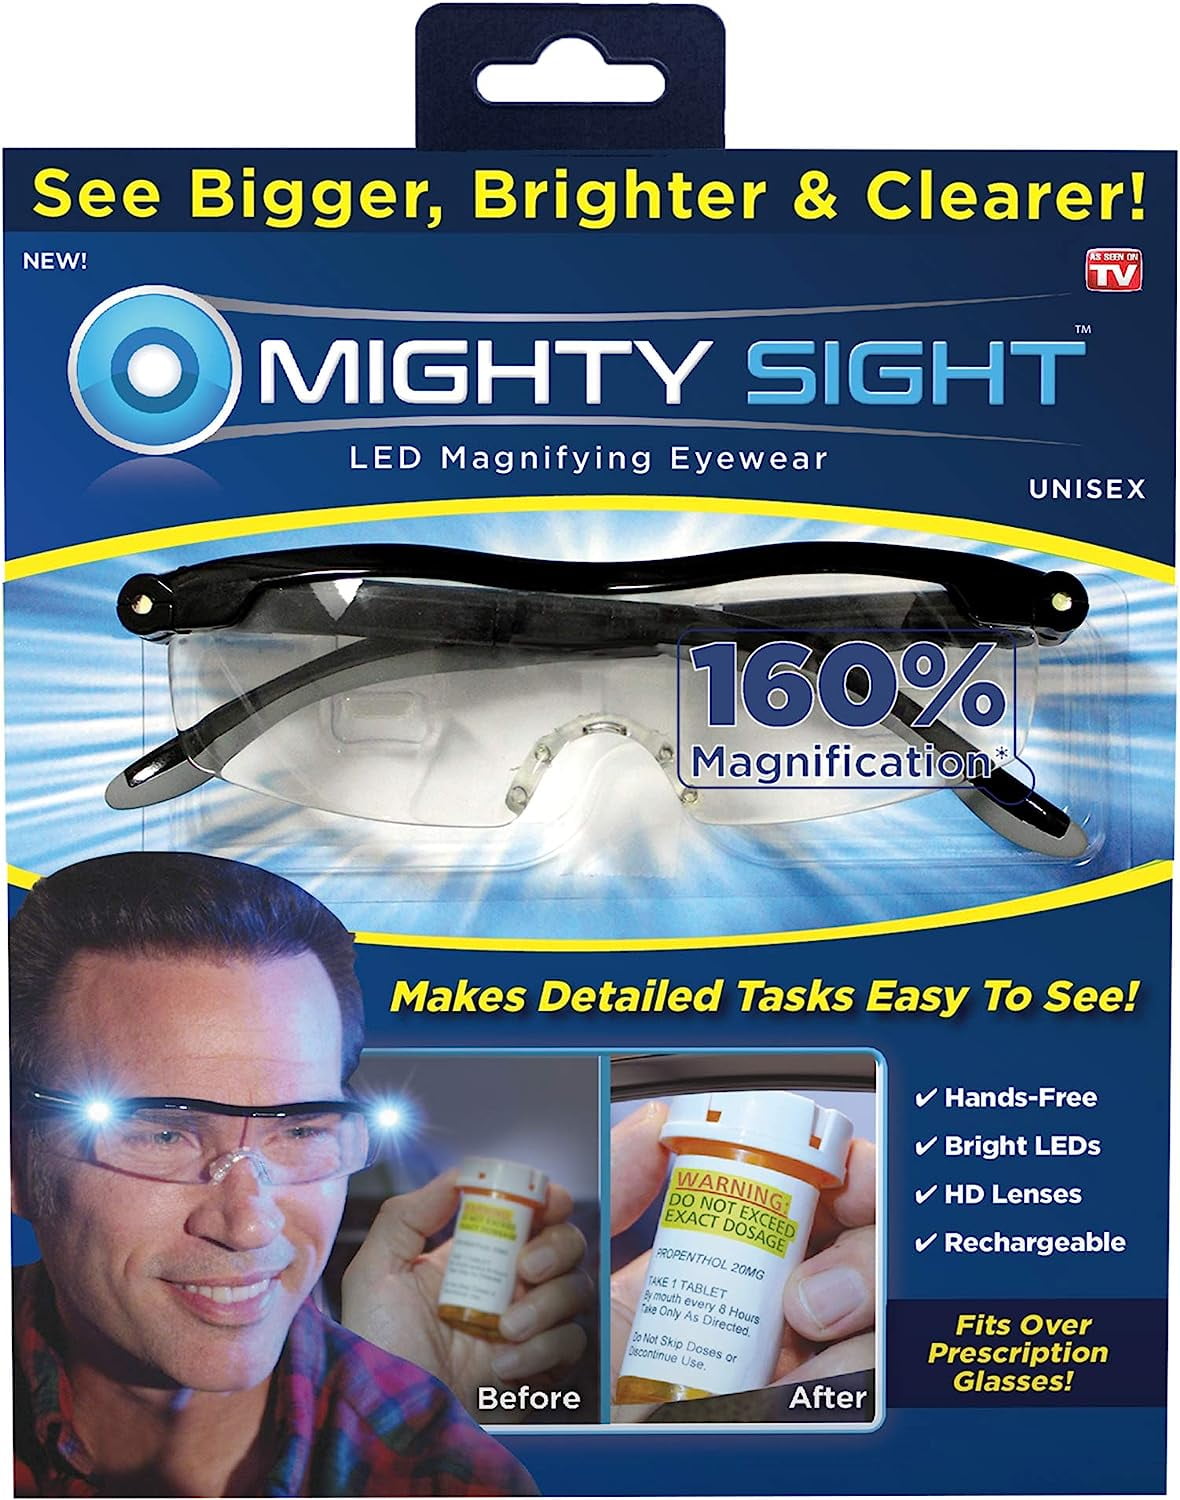  LED Glasses Magnifier, Magnifier for Reading, Keilani LED  Glasses Magnifier, Mighty Sight Lighted LED Magnifying Eyewear : Health &  Household